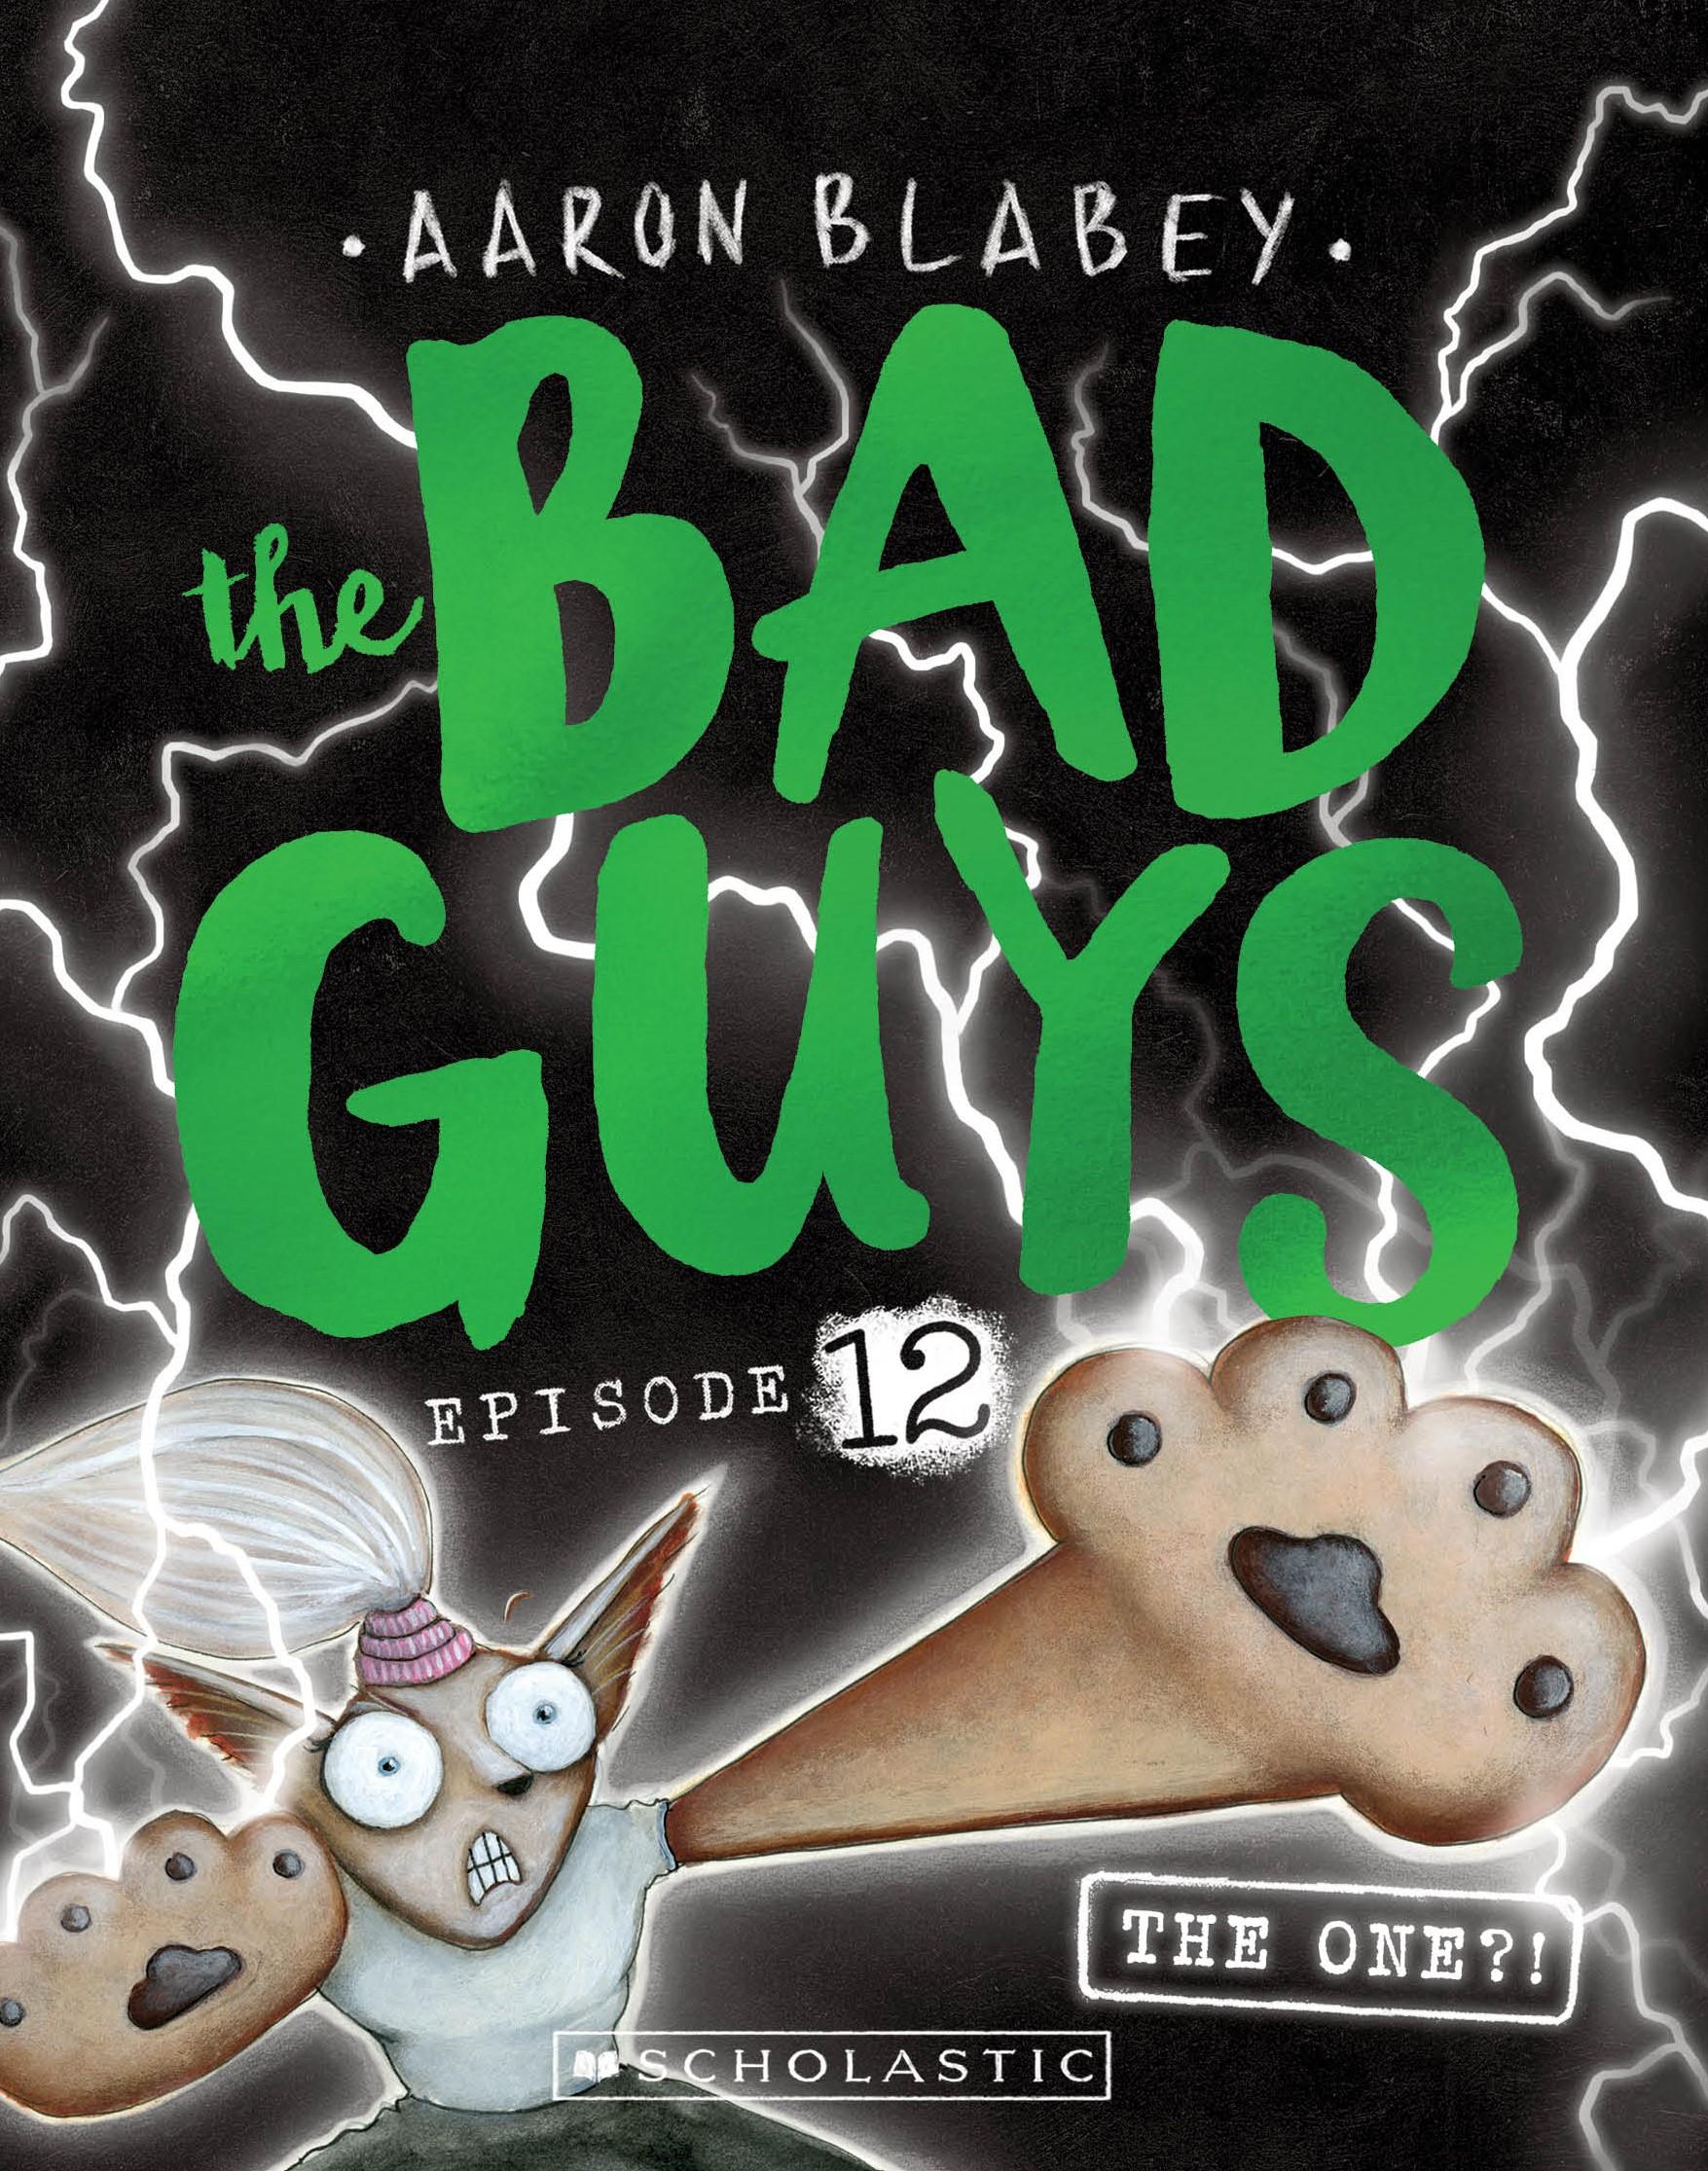 The Bad Guys - Episode 12: The One?!